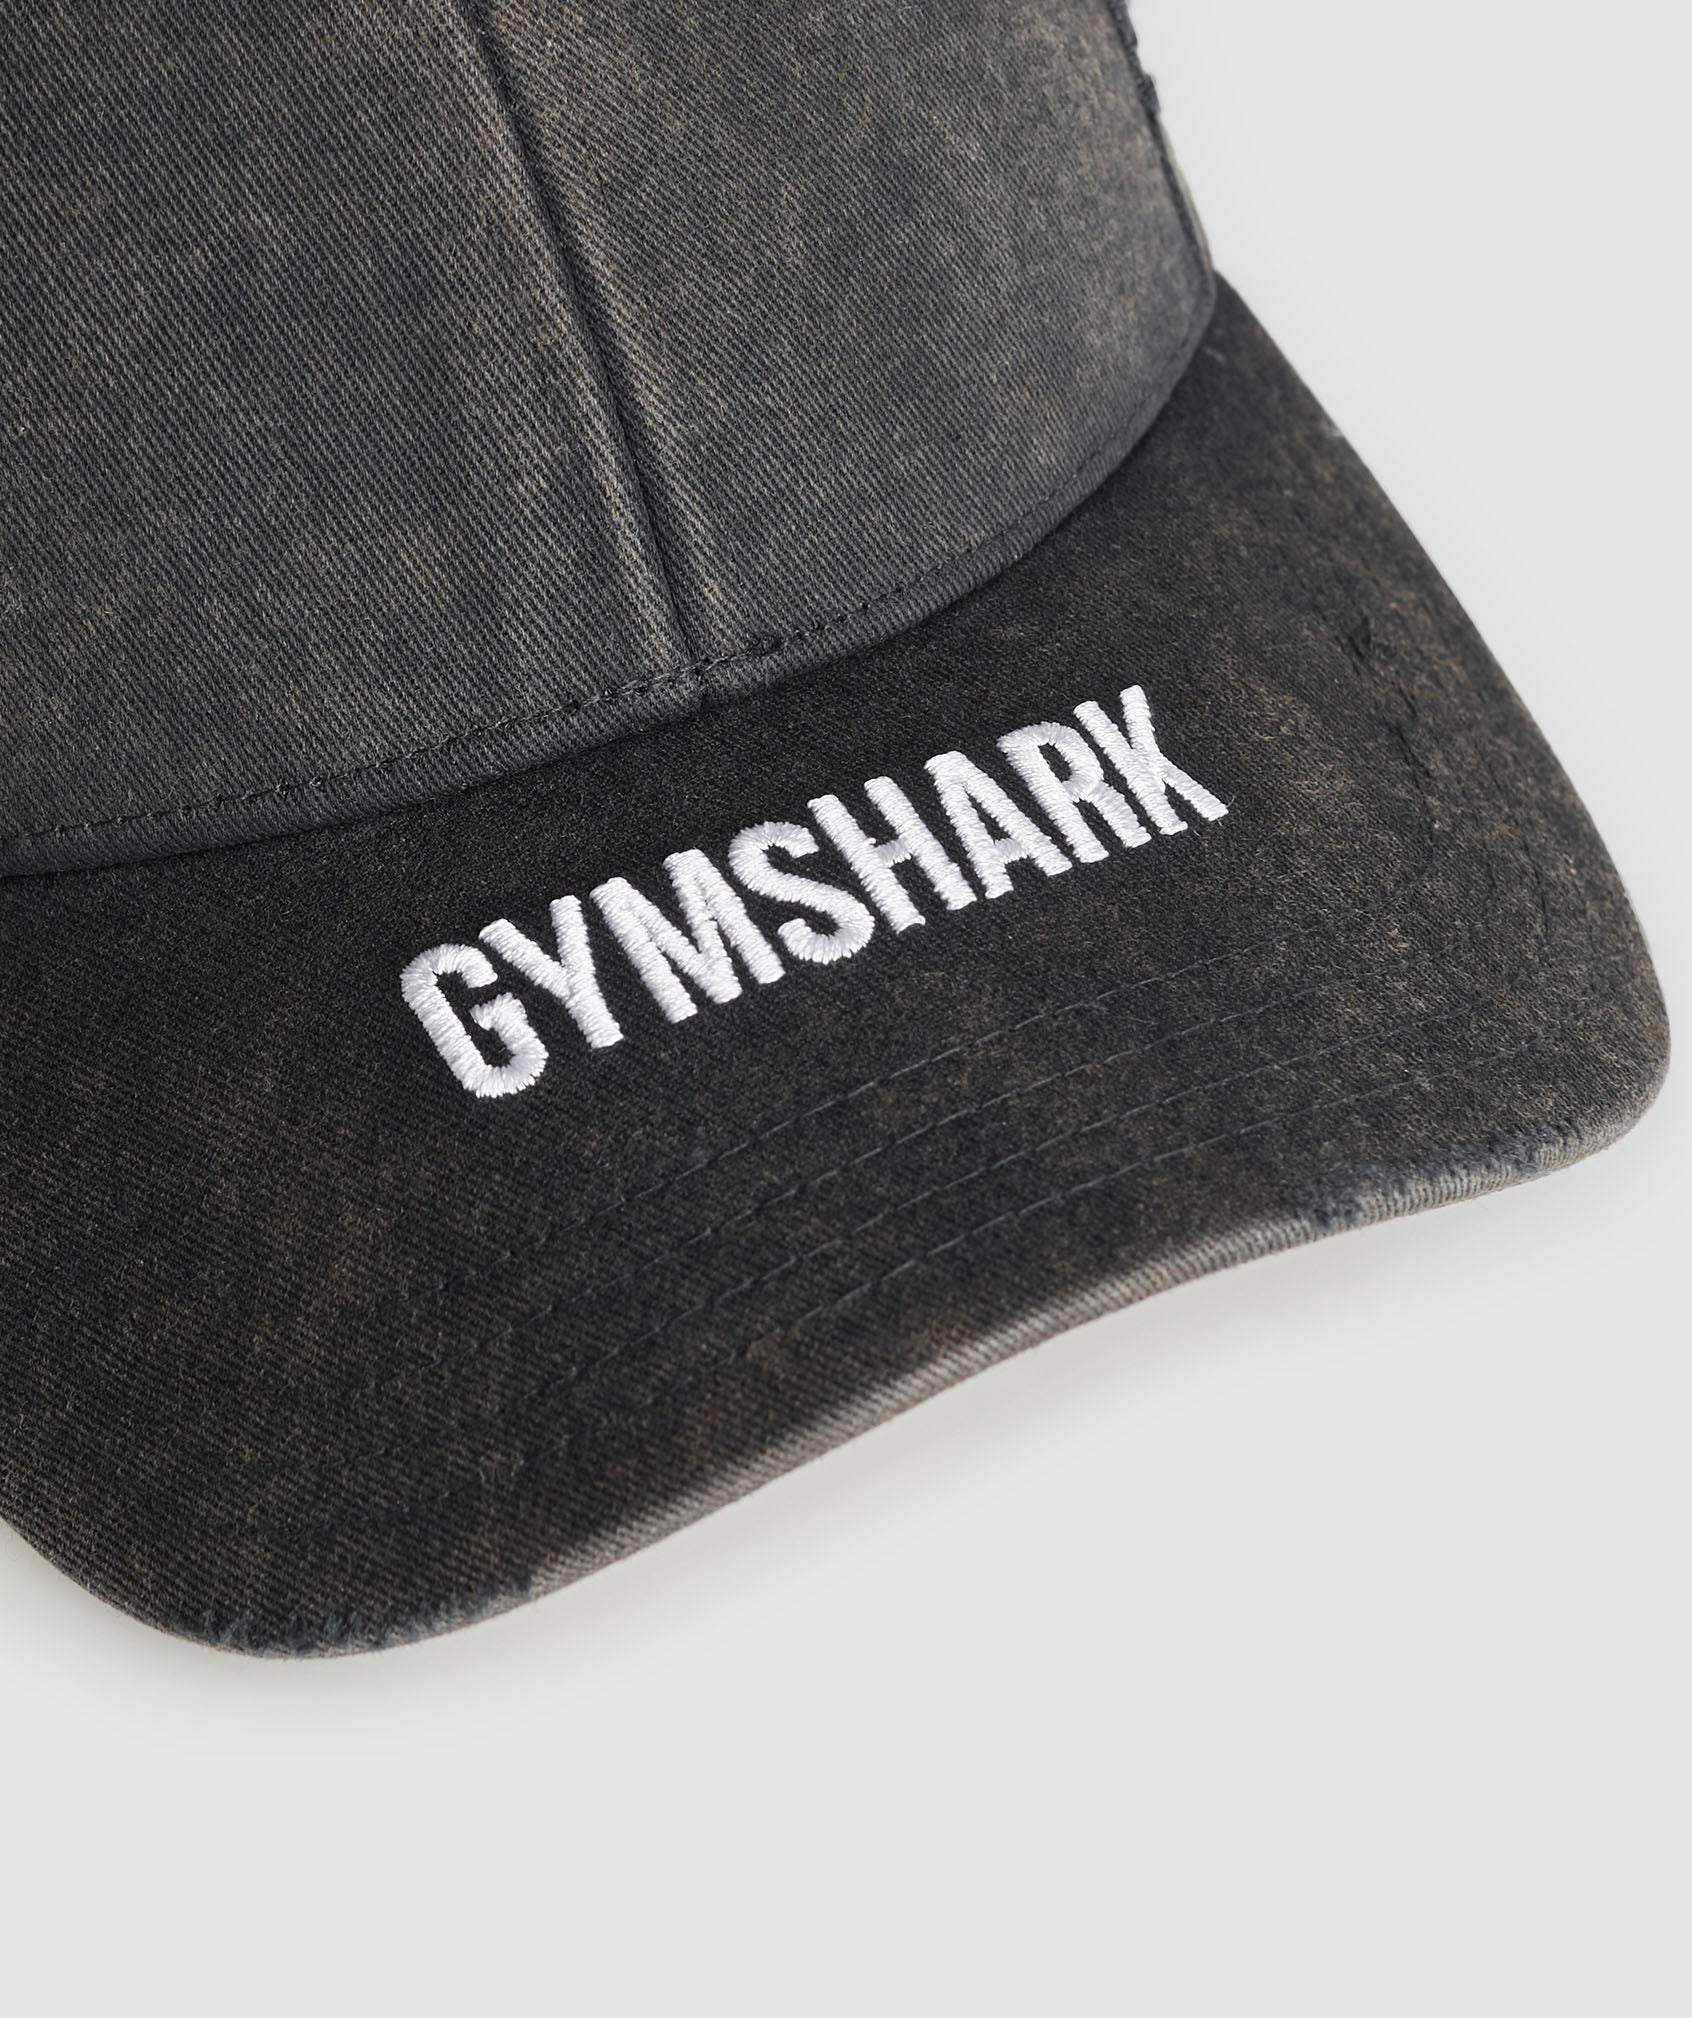 Washed Cap in Black - view 3